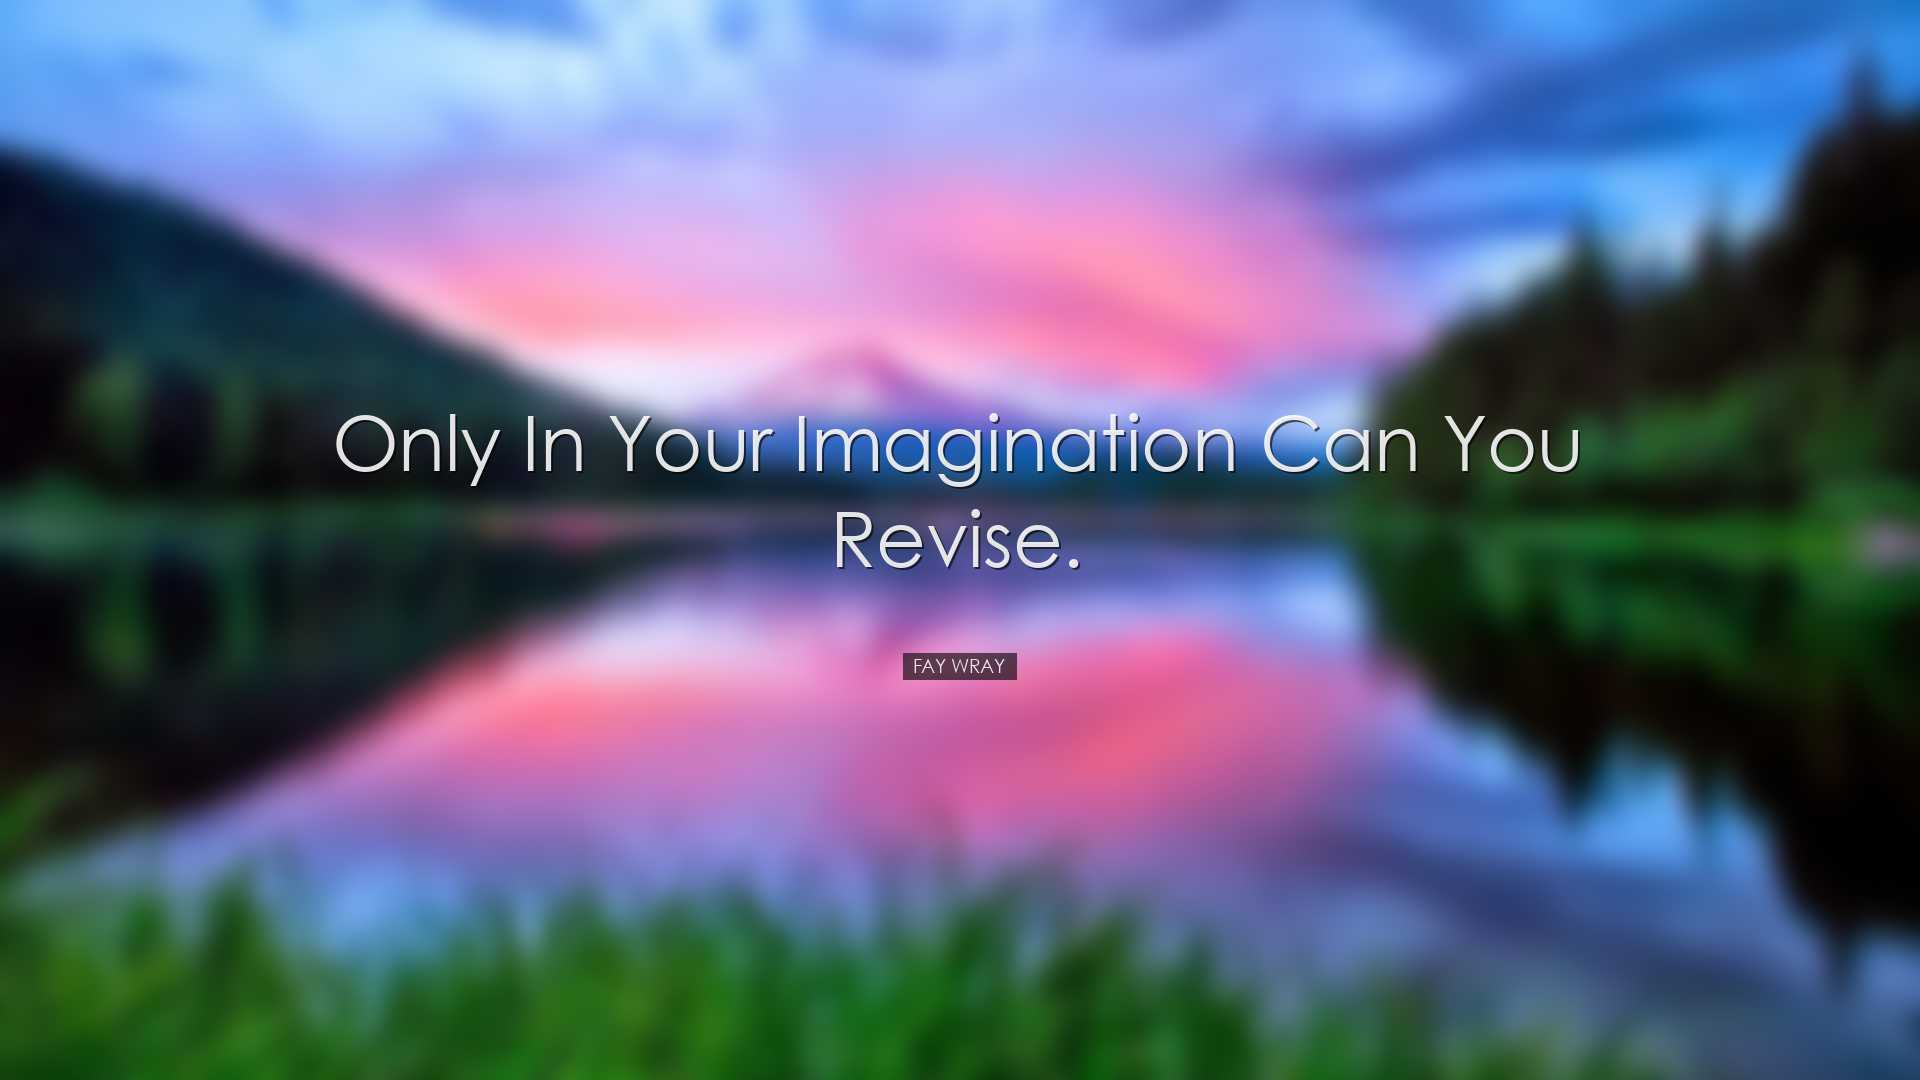 Only in your imagination can you revise. - Fay Wray